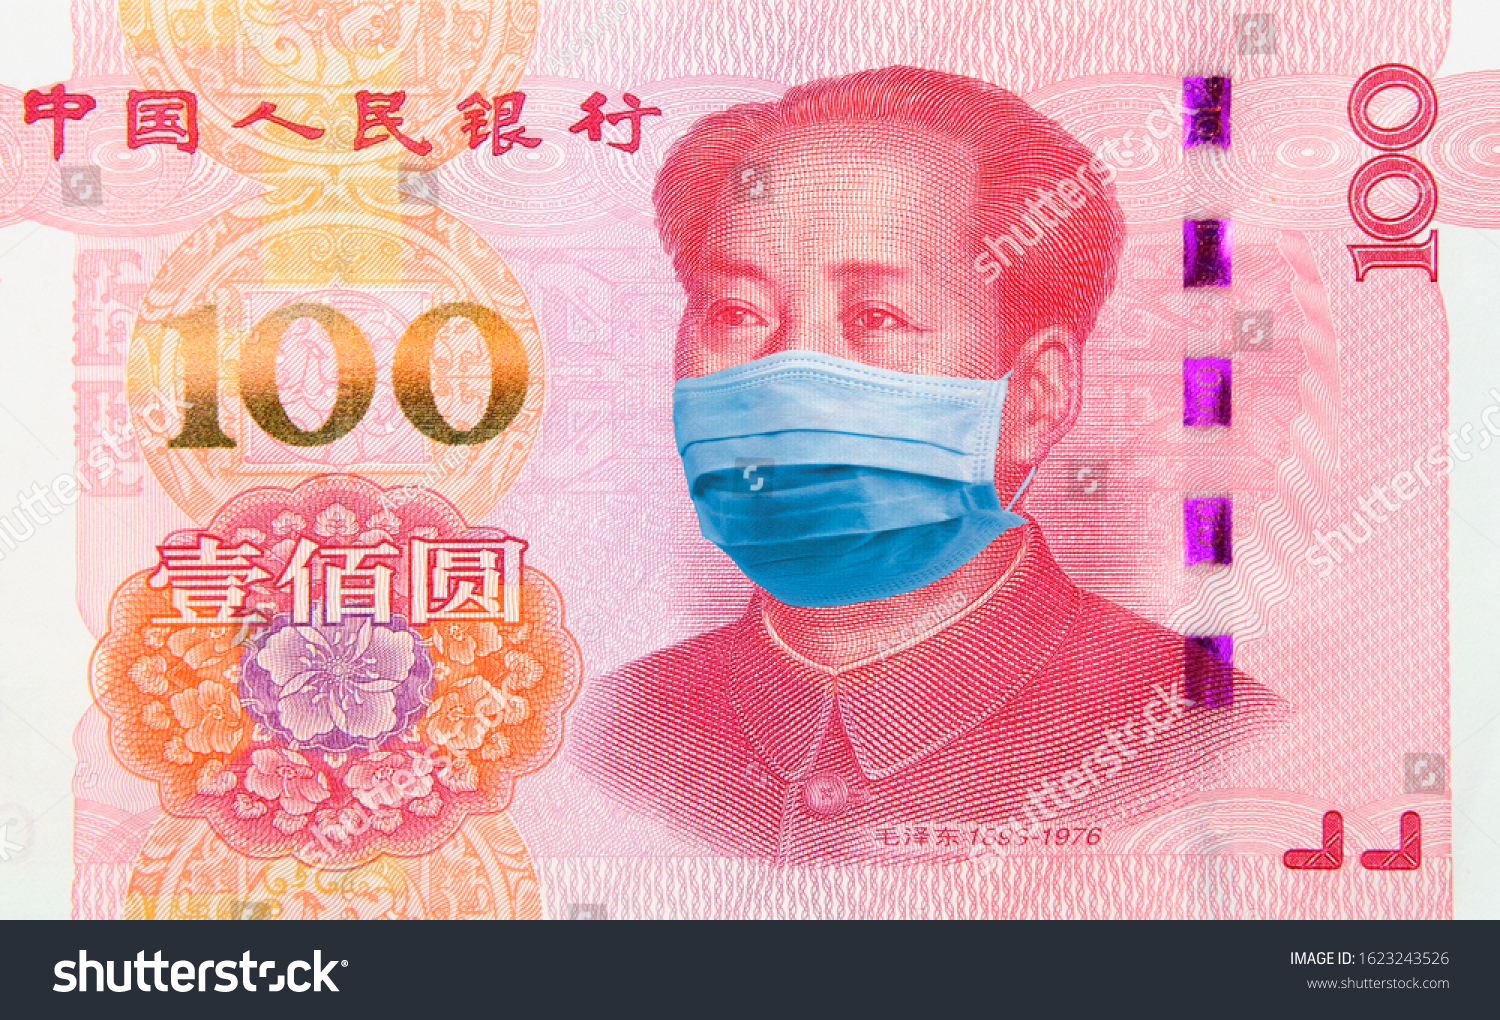 Omicron Coronavirus COVID vs Finance in China. Concept: Quarantine in China, 100 Yuan banknote with face mask. Digital montage #1623243526